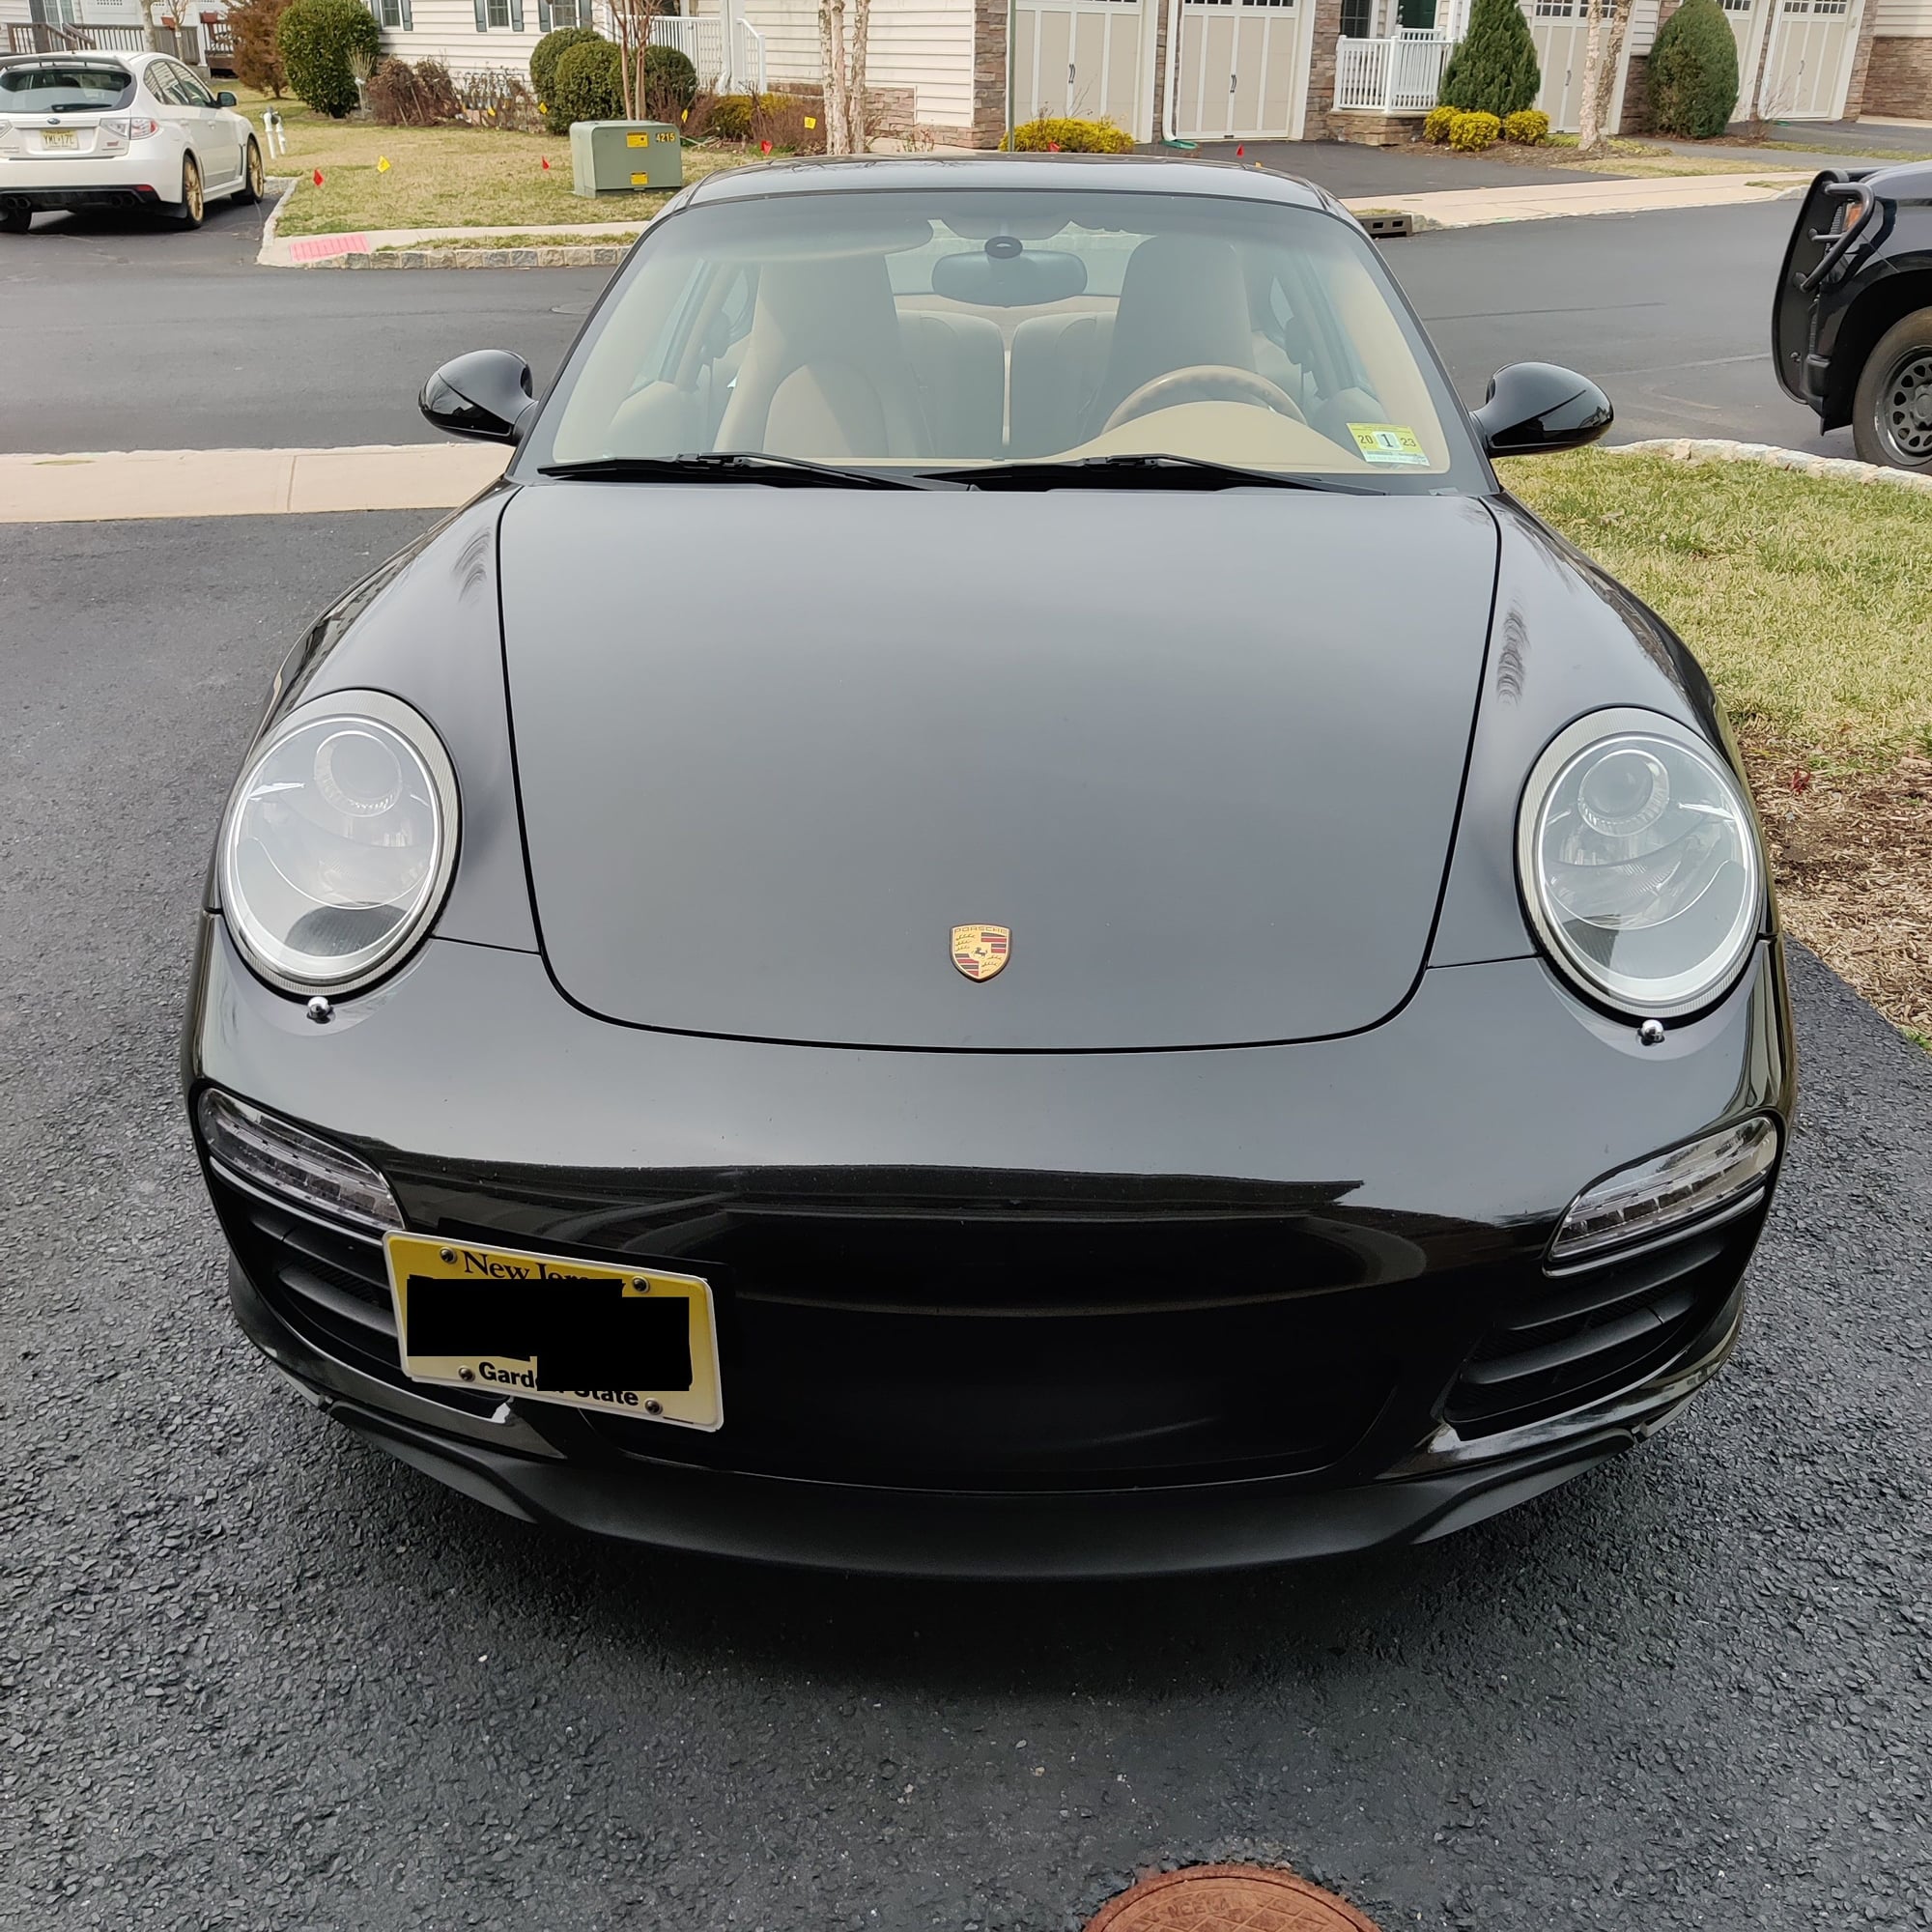 2009 Porsche 911 -  - Used - VIN WP0AA29909S706384 - 135,000 Miles - 6 cyl - 2WD - Manual - Coupe - Black - Princeton, NJ 08544, United States